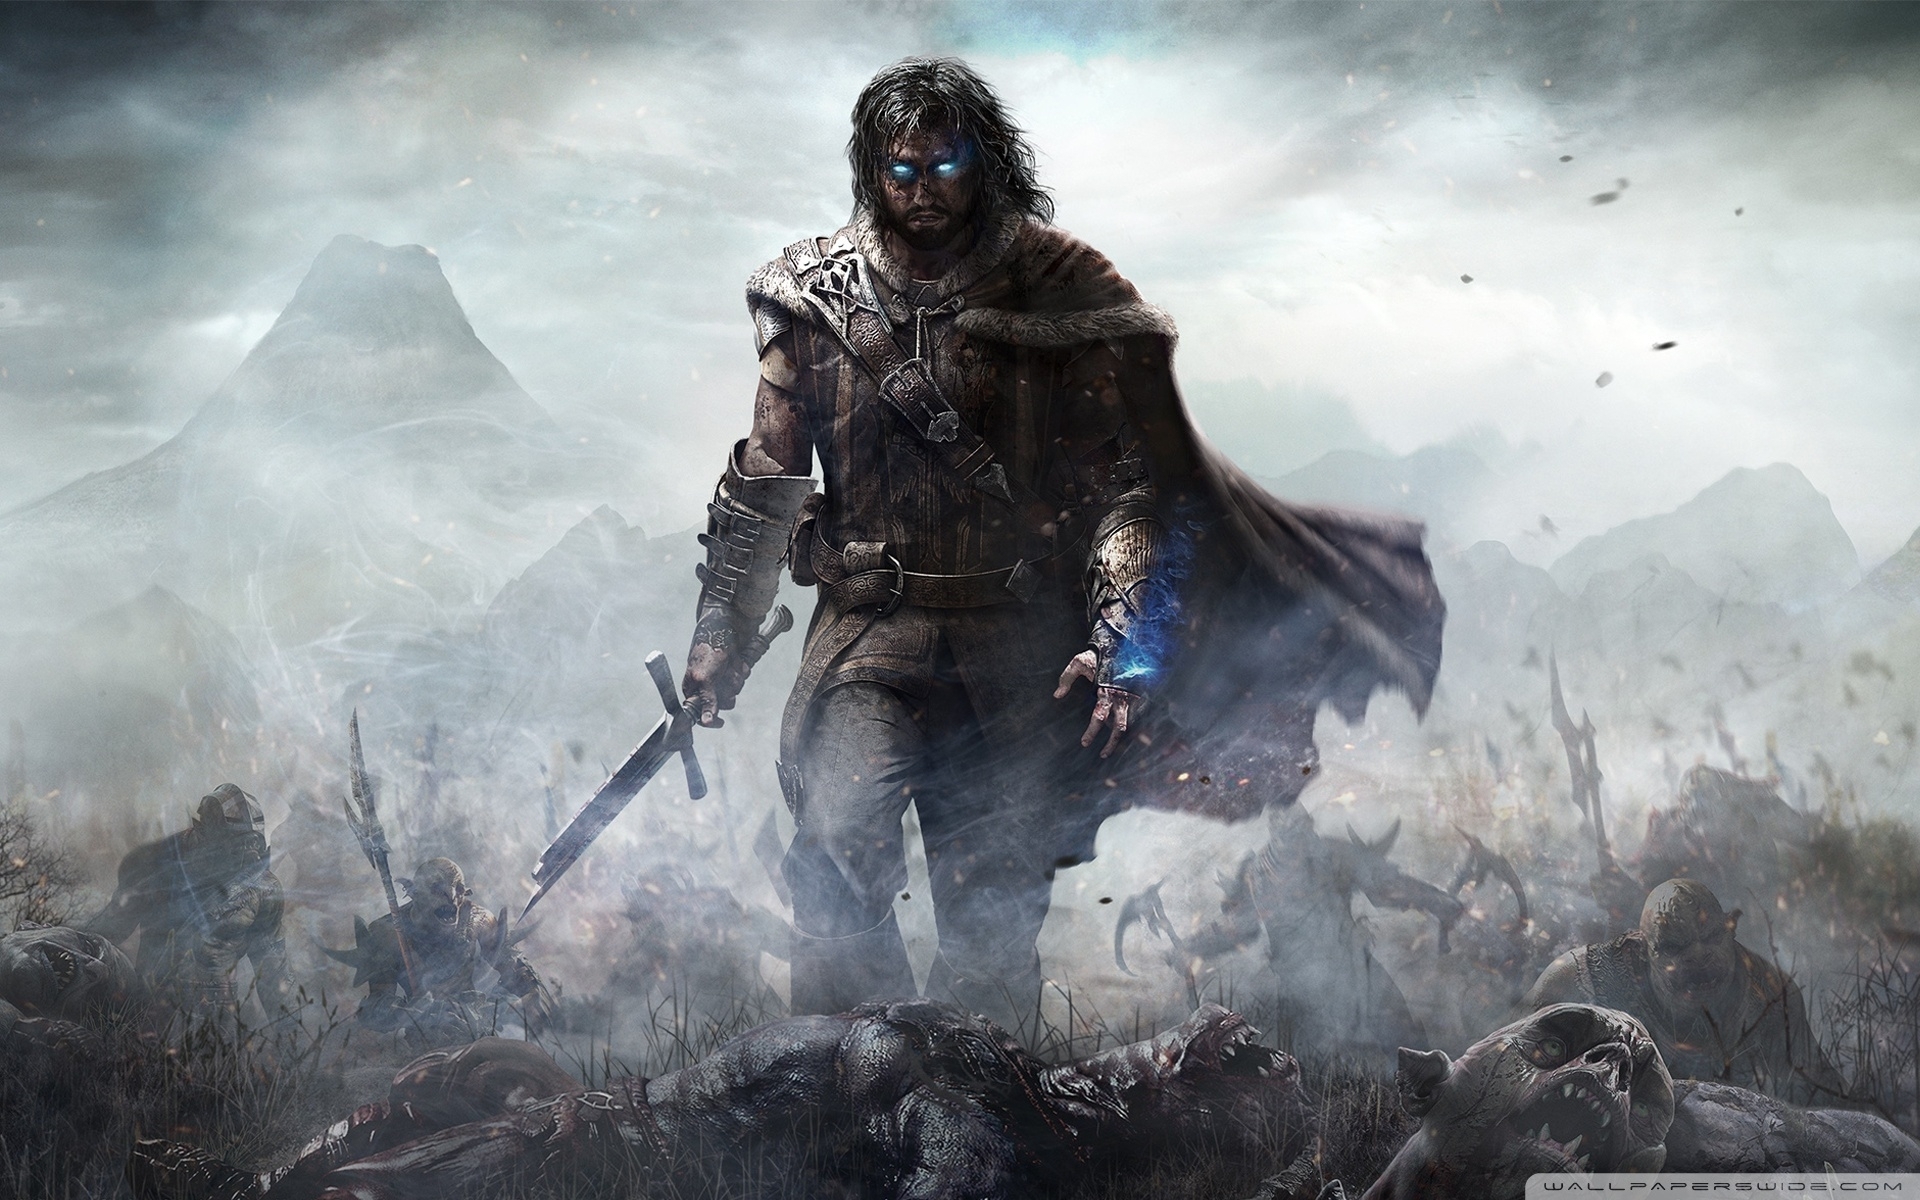 10 New Middle Earth Shadow Of Mordor Wallpaper FULL HD 1920×1080 For PC Background